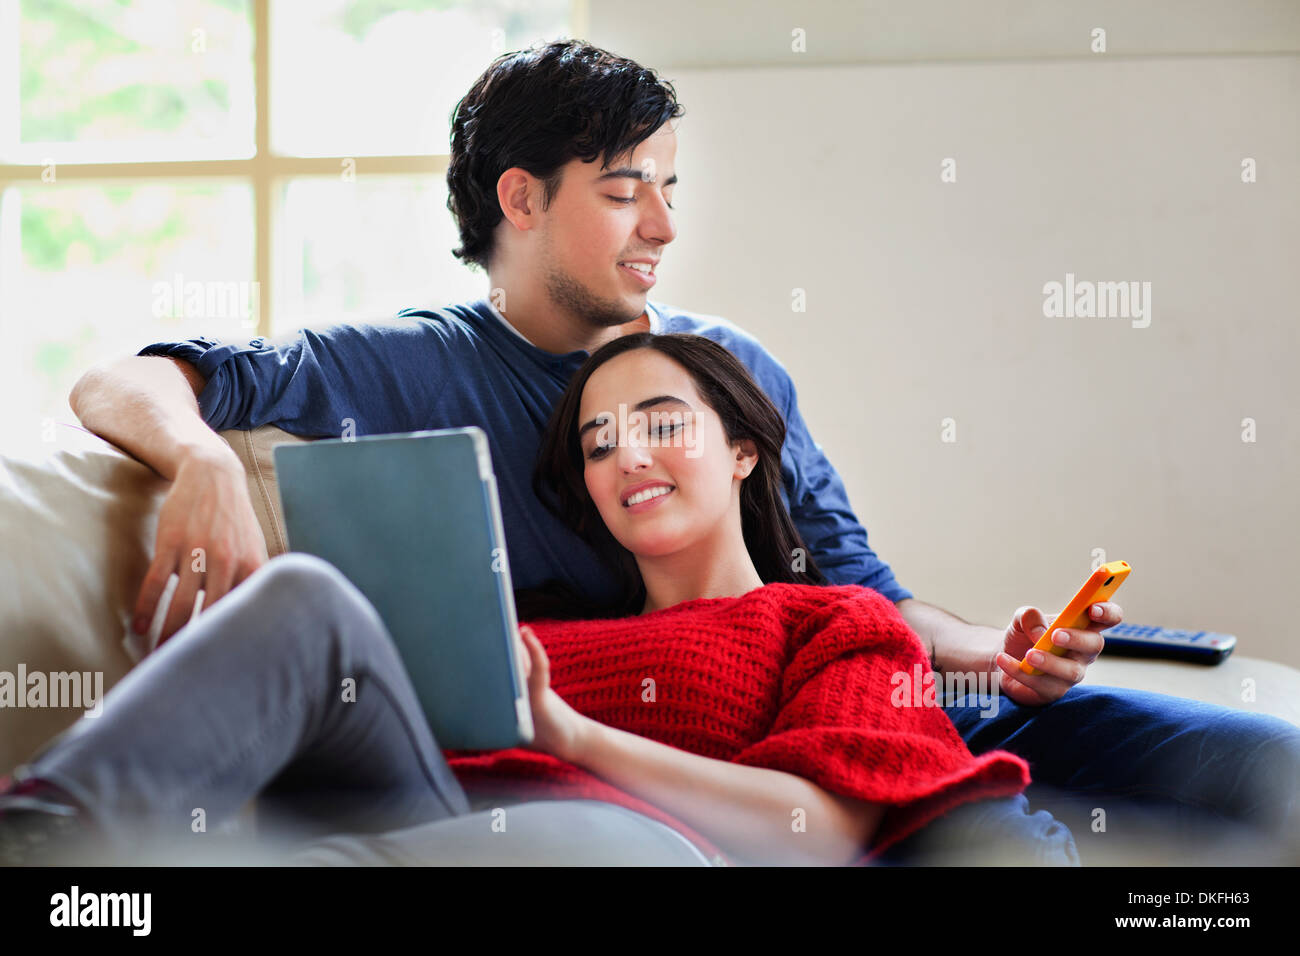 Young couple with digital tablet and mobile on living room sofa Stock Photo